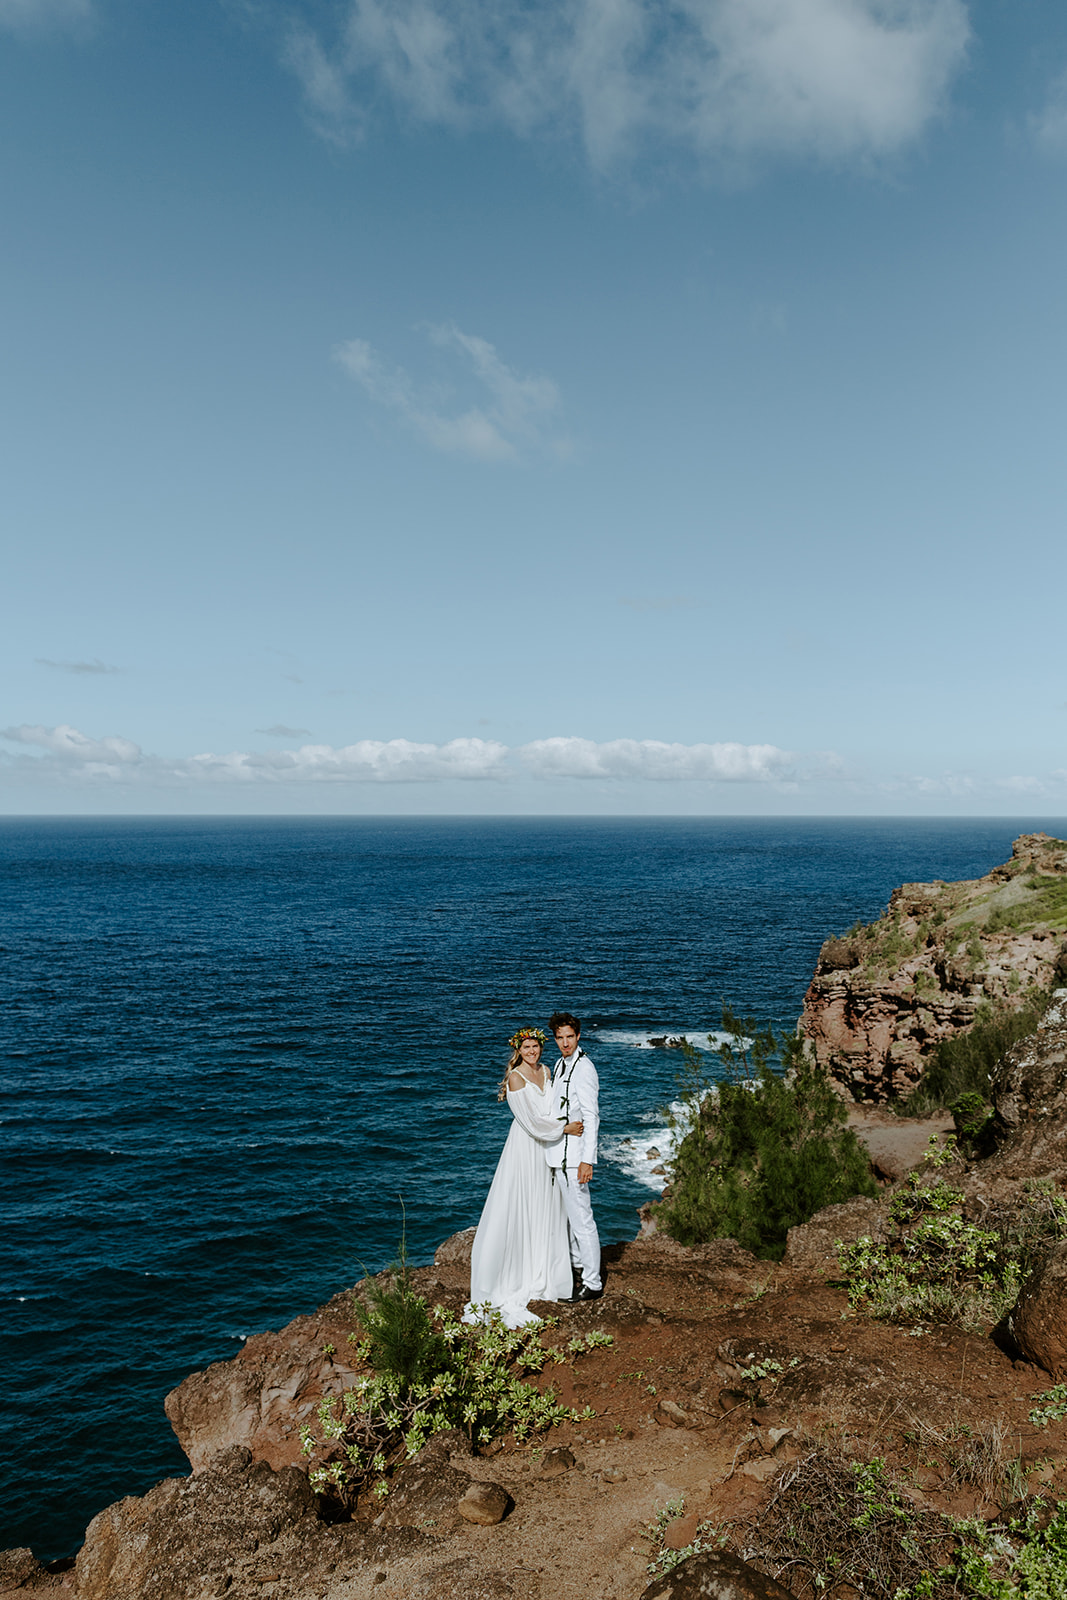 A couple who eloped in Maui say their vows during a Hawaii cliffside wedding ceremony by the ocean 